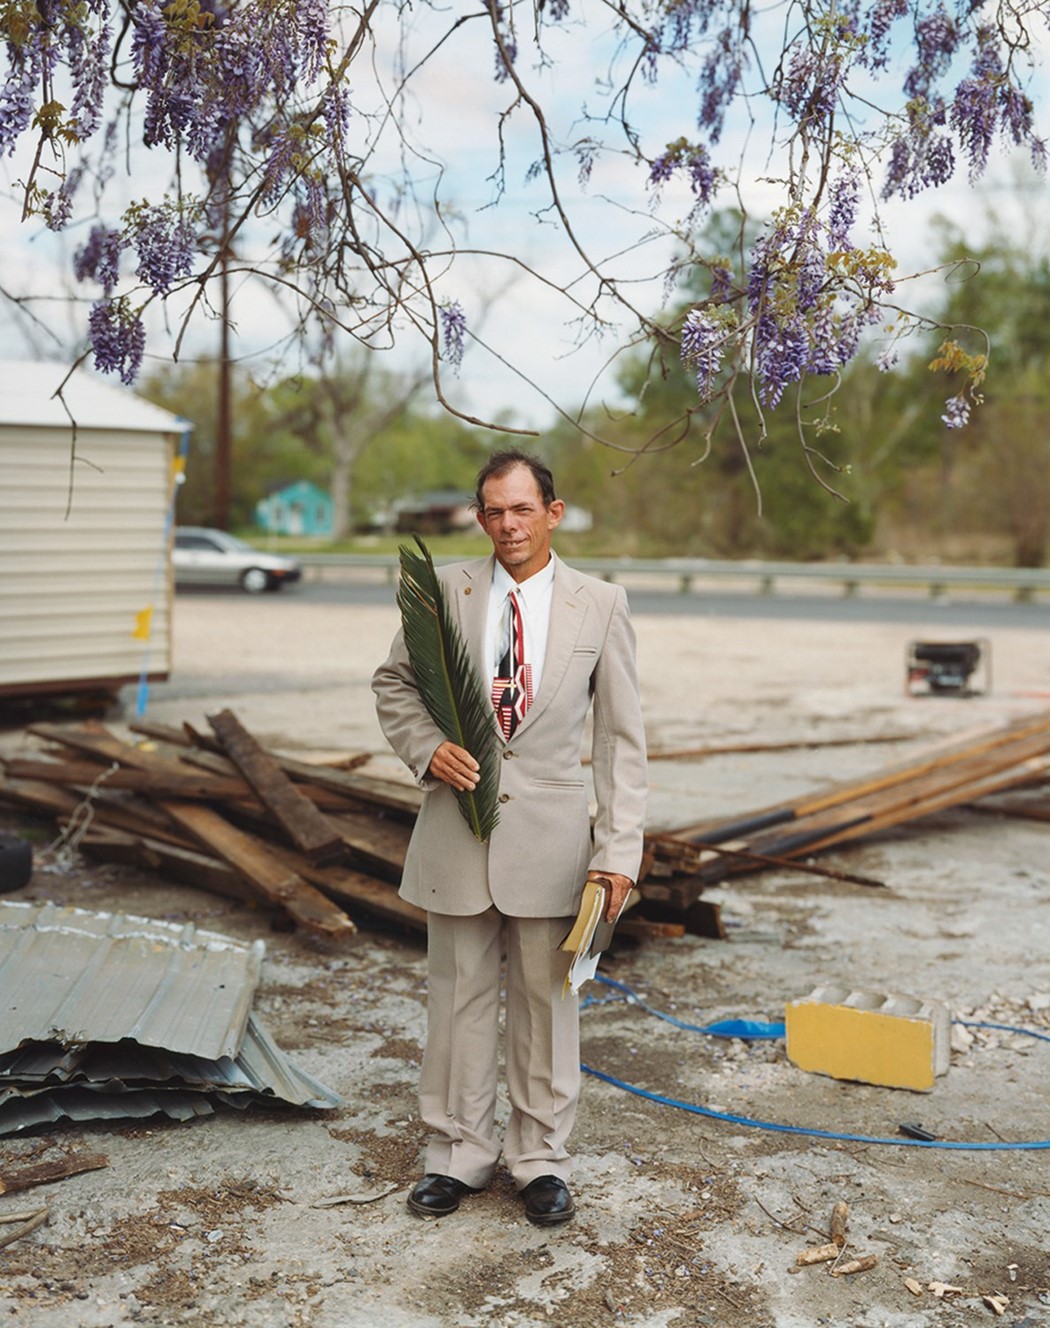 Alec Soth's Sleeping By The Mississippi | Dazed